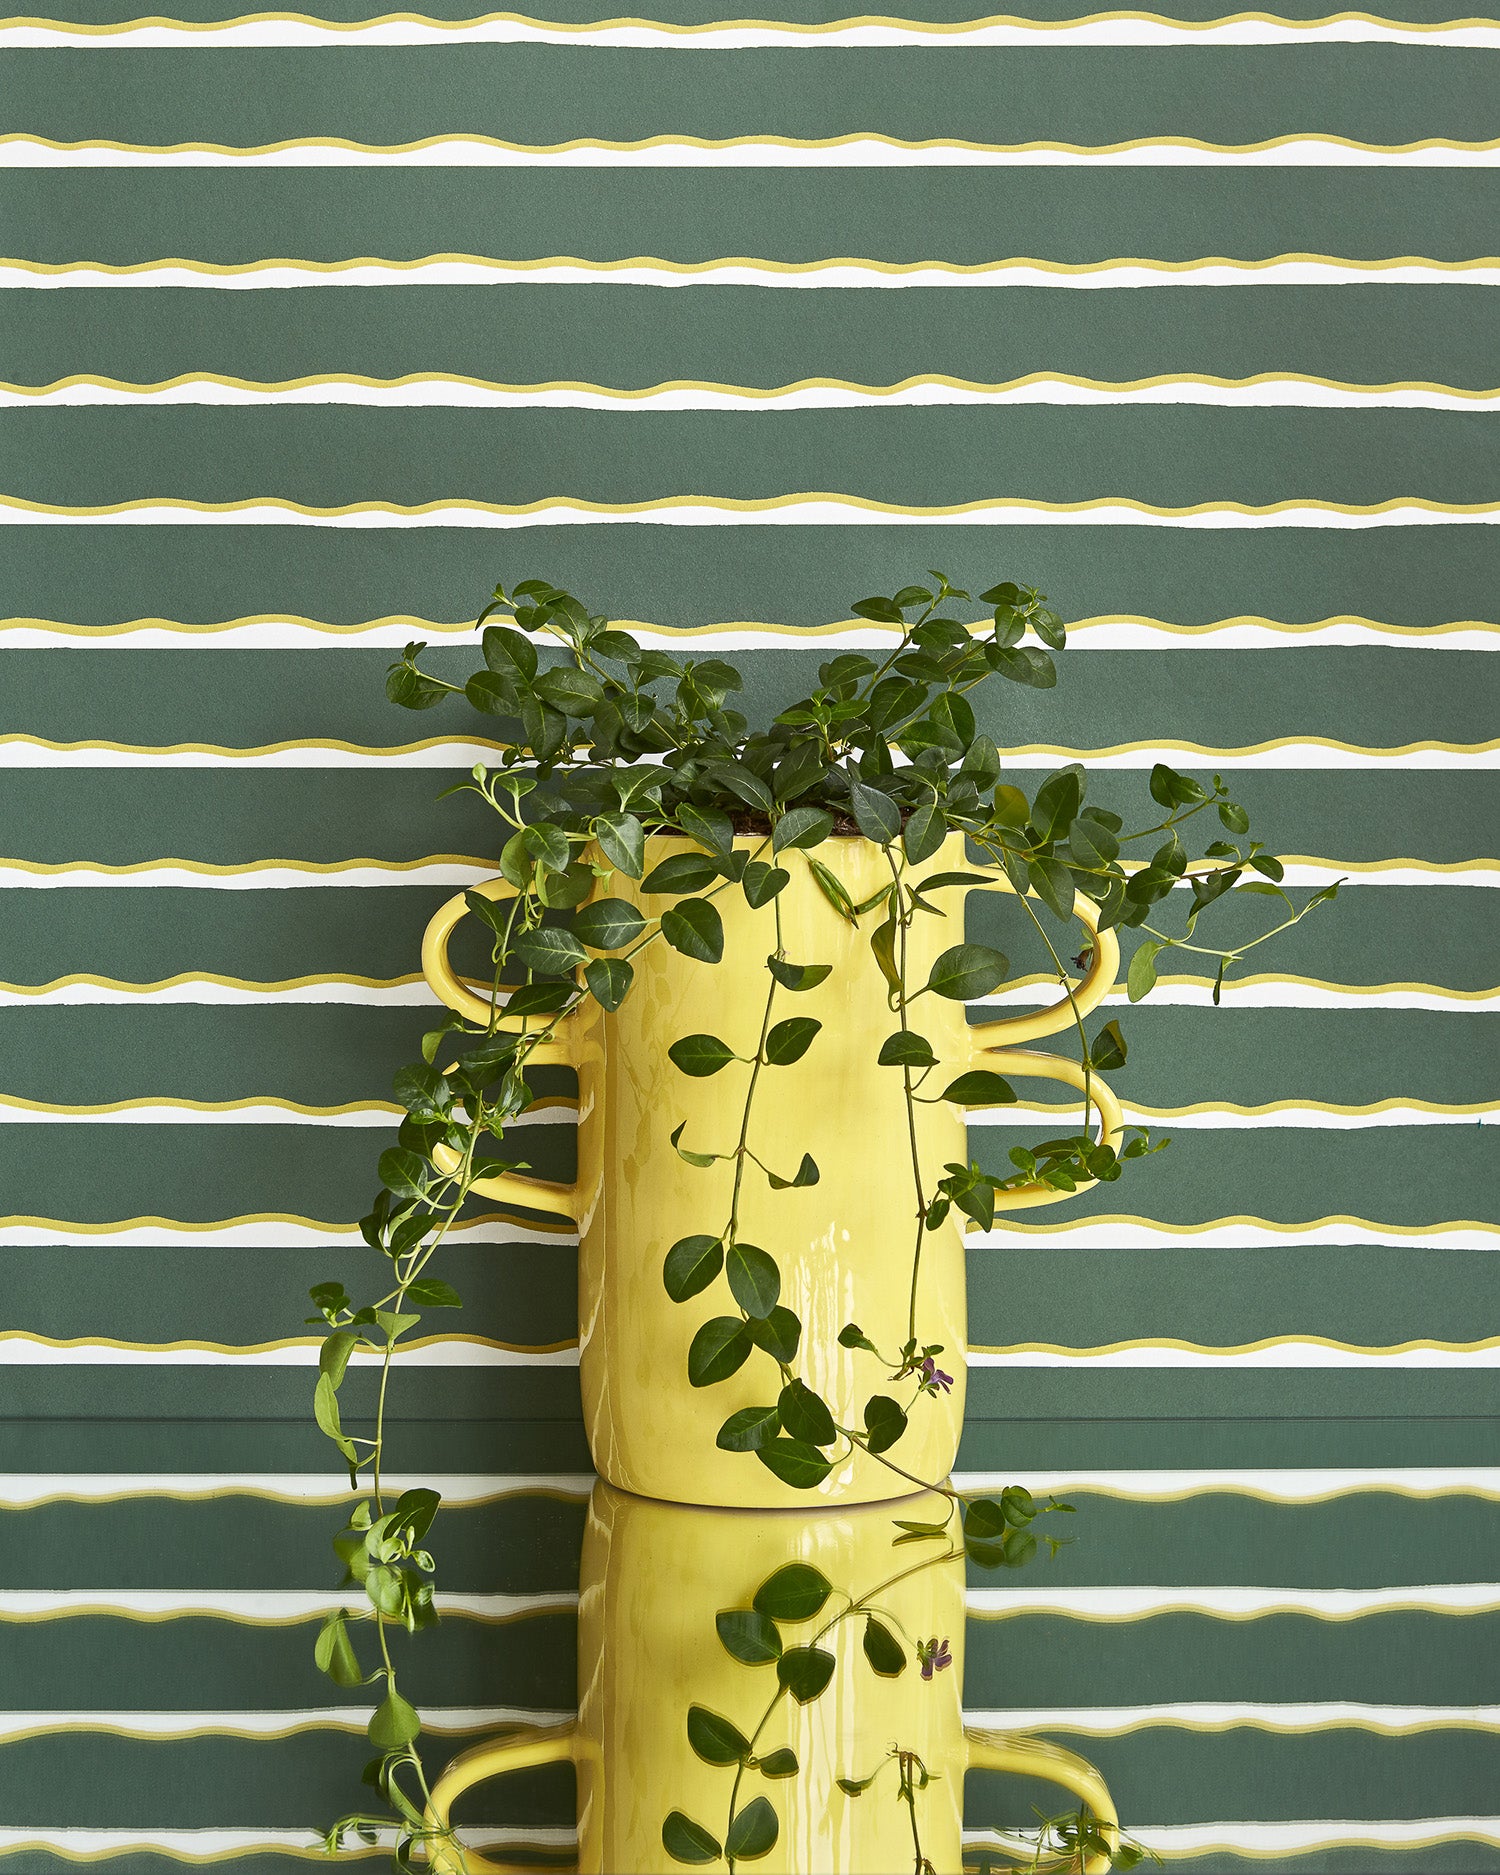 A large potted plant stands in front of a wall papered in an undulating stripe pattern in mustard, white and sage.